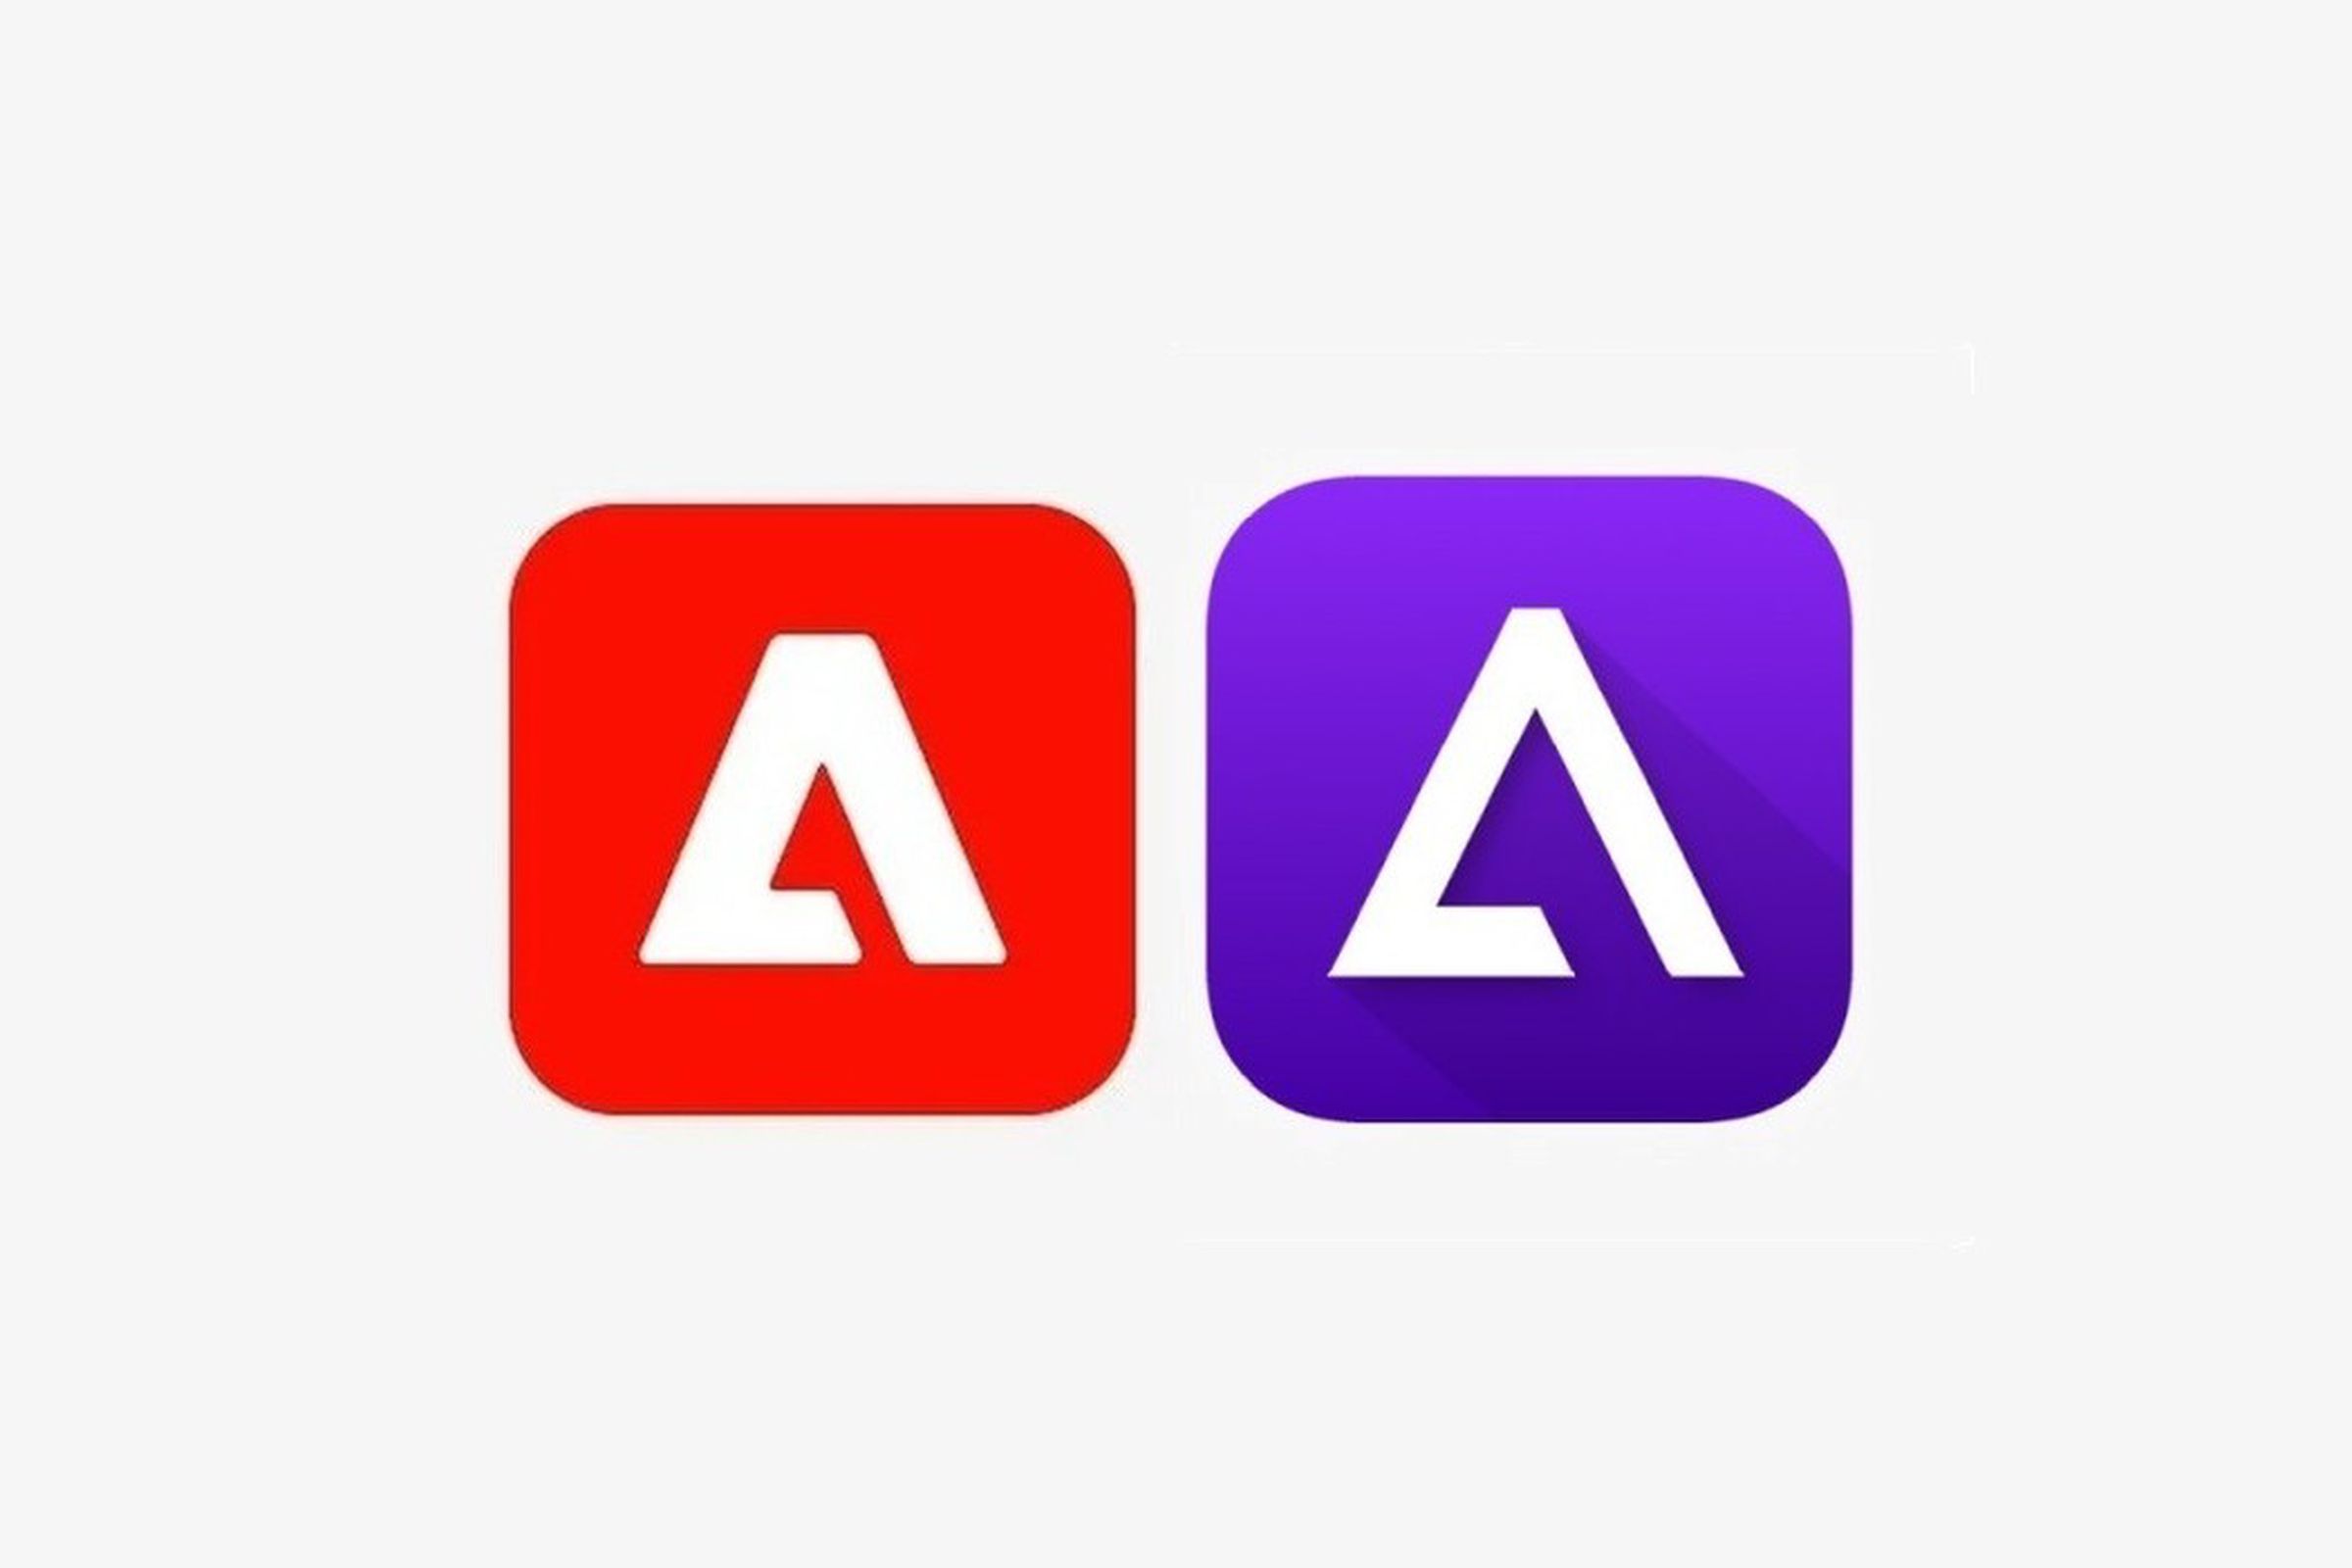 There’s no denying the similarities to Adobe’s Experience Cloud logo (left), but Adobe typically uses a negative space logo that’s harder to mistake.